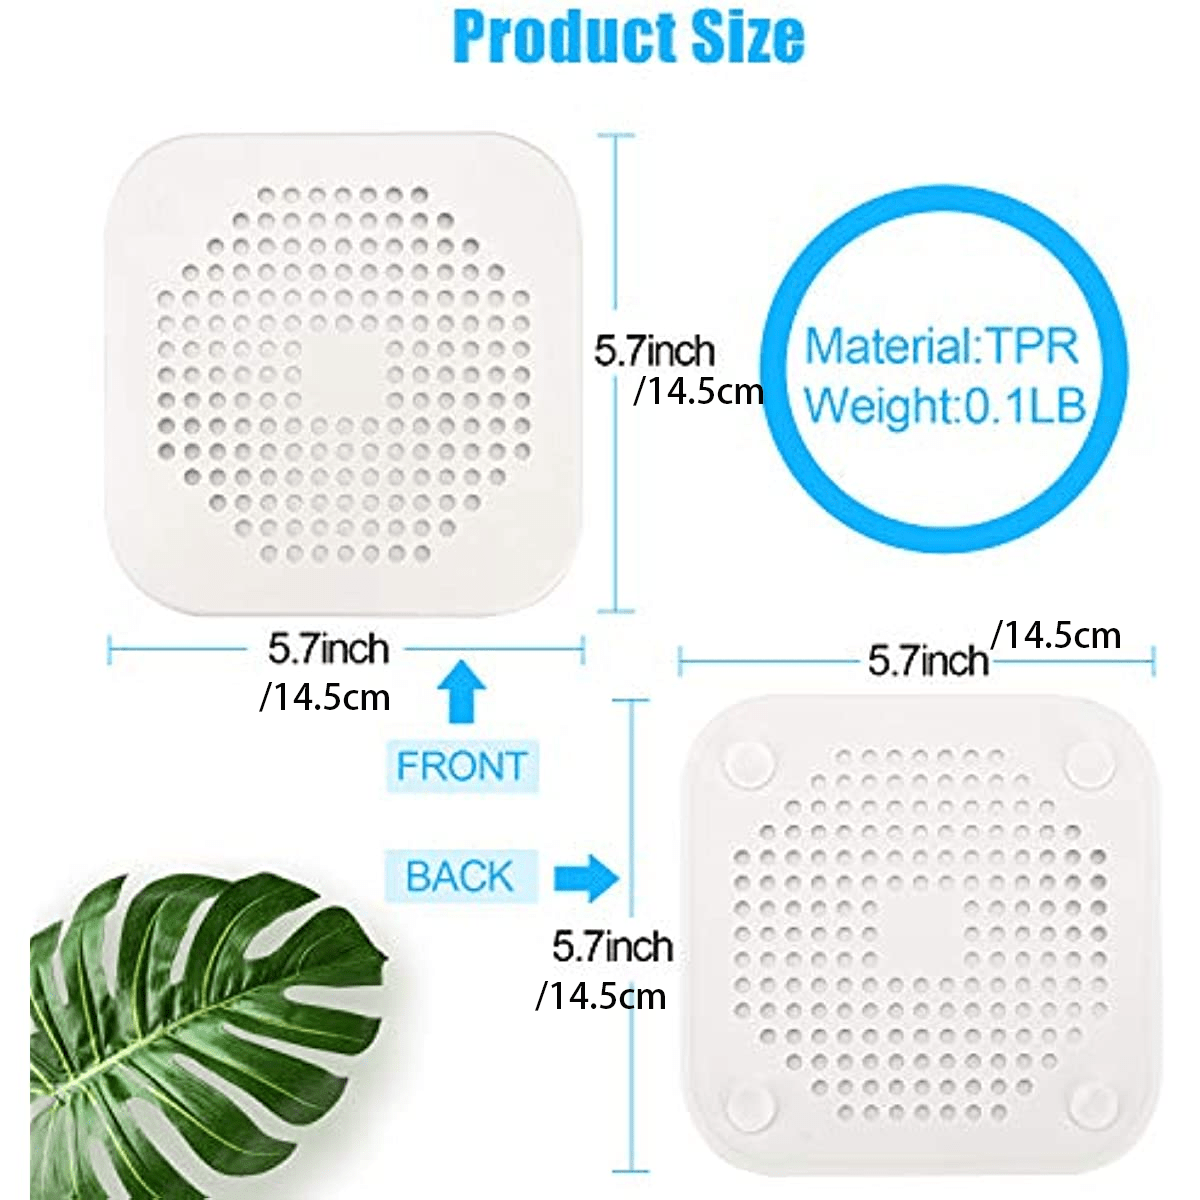 Shower Drain Hair Catcher - Silicone Square Drain Cover for Shower or  Kitchen Drain - Catches Hair & Debris Without Blocking Drainage - 5.7- inch